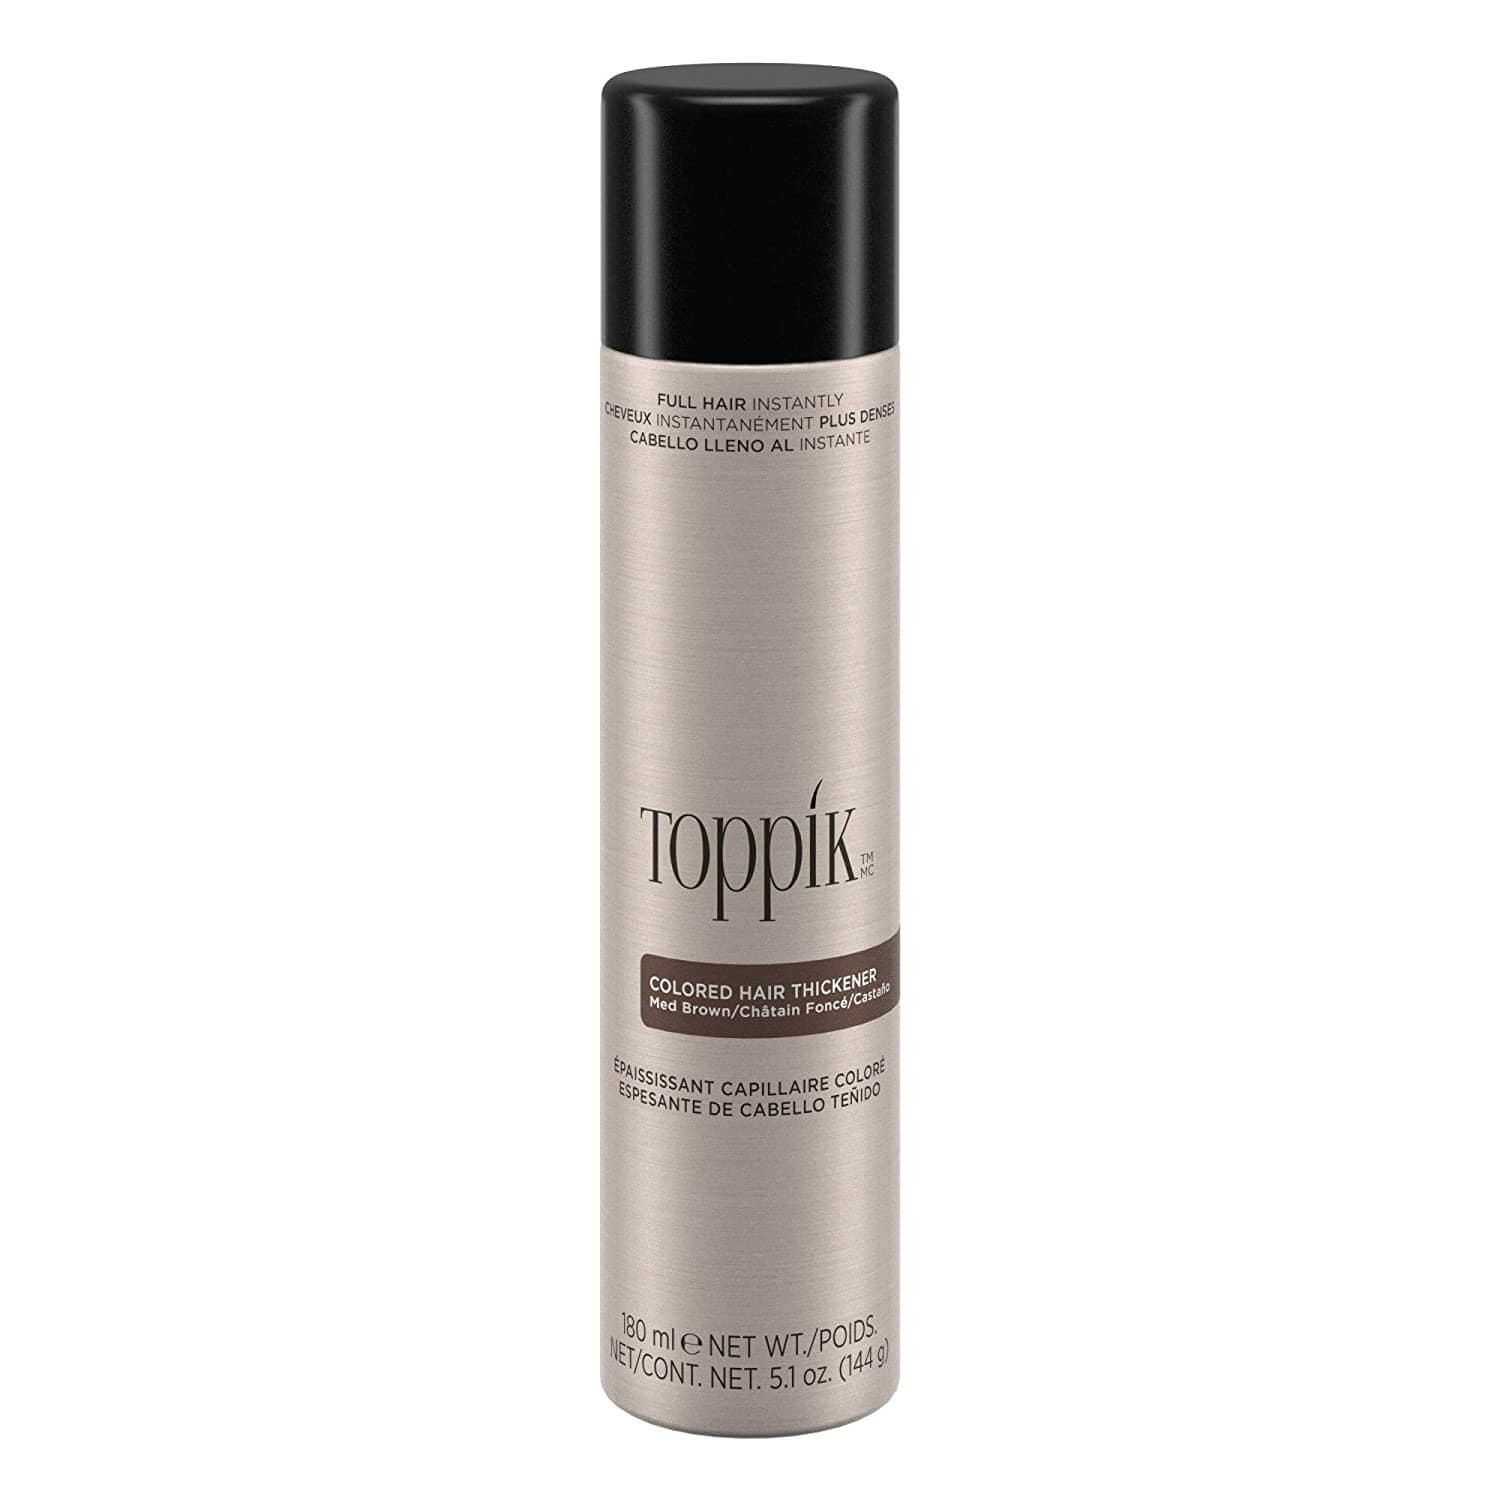 Toppik Colored Hair Thickener - MEDIUM BROWN Toppik 5.1 oz/144g bottle Shop at Exclusive Beauty Club